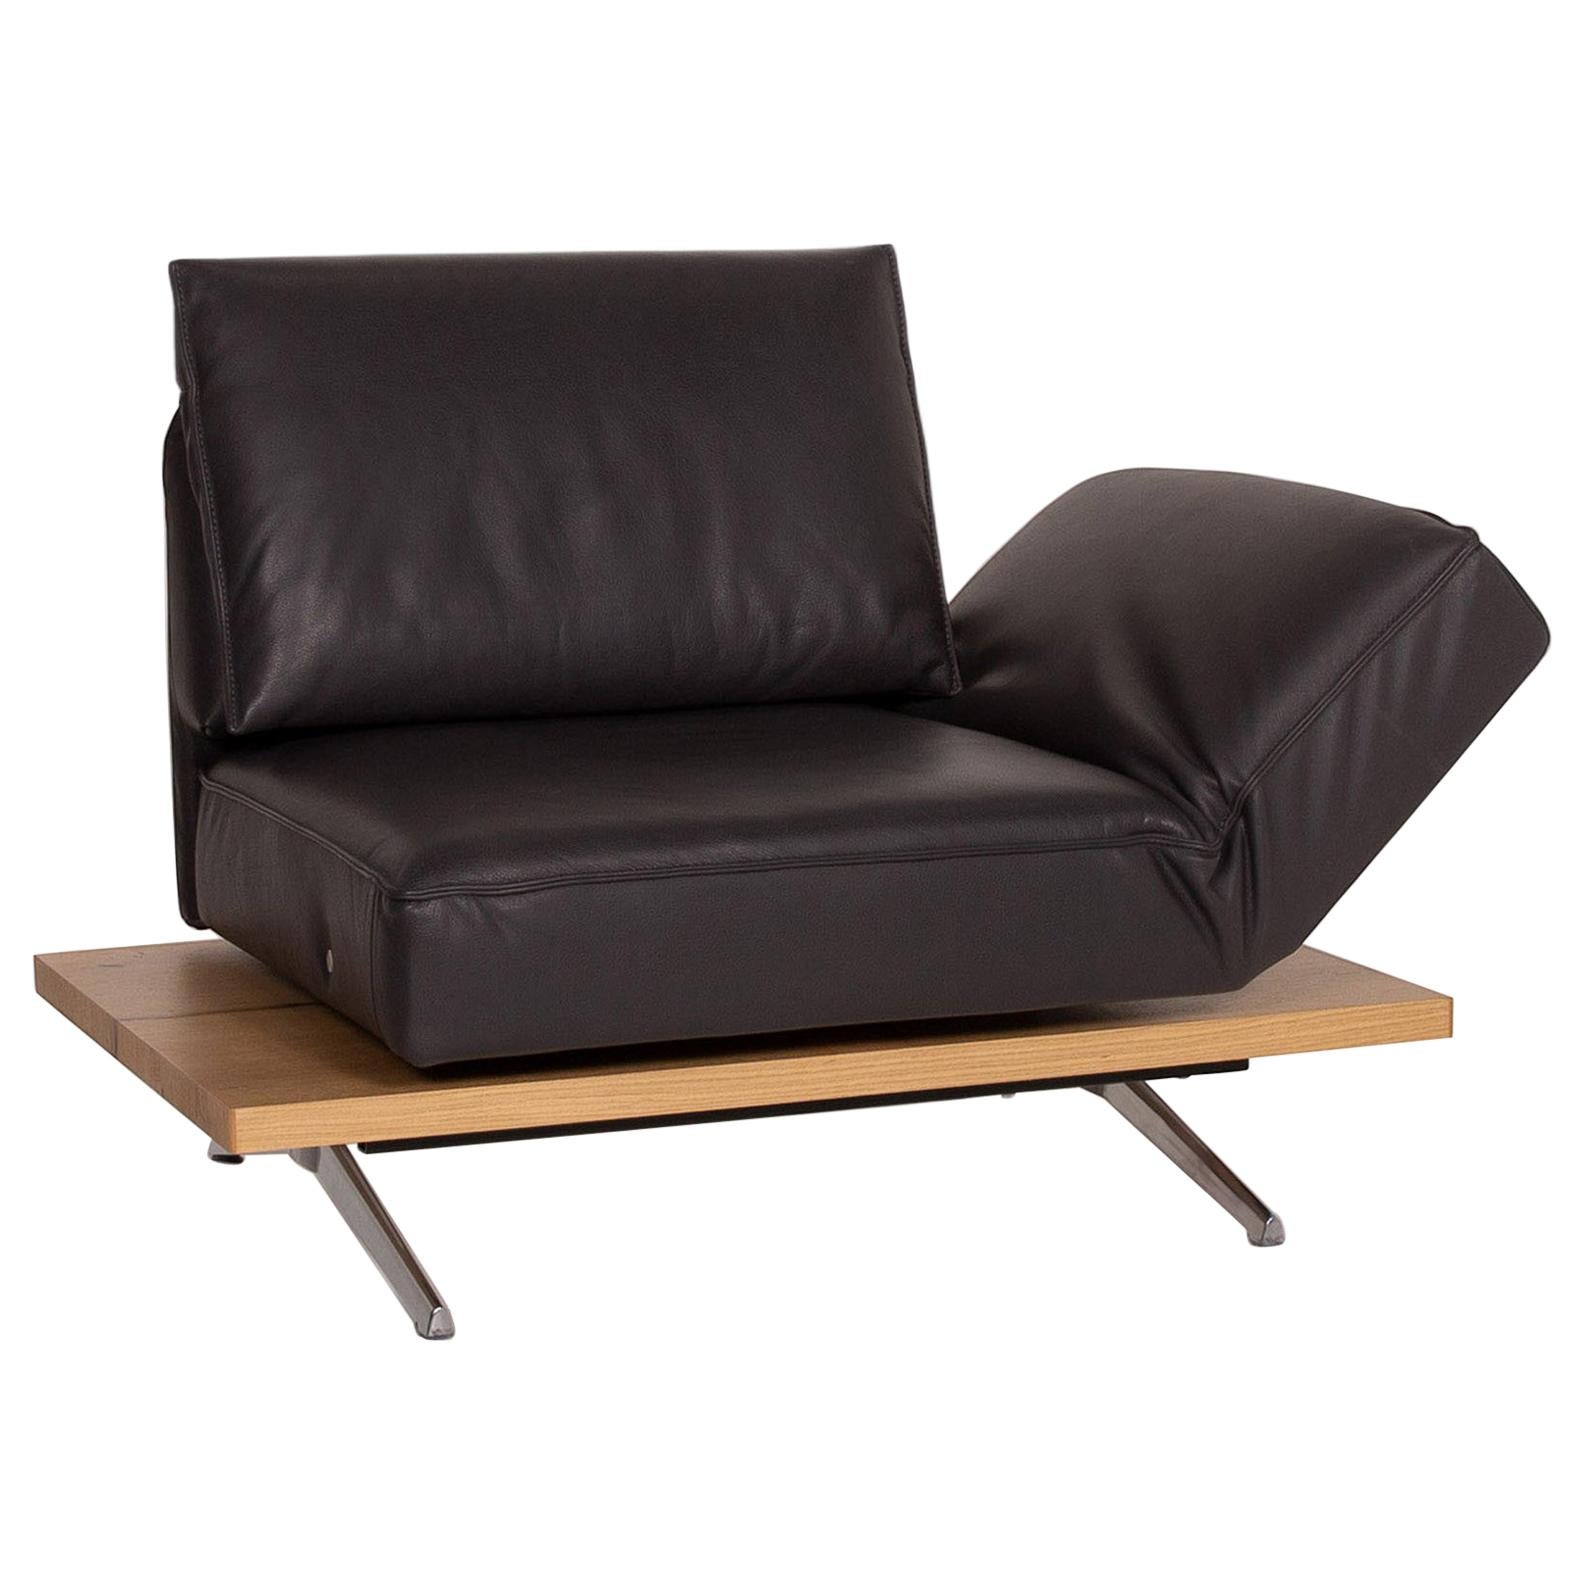 Koinor Phoenix Leather Armchair Gray Two-Seat Function